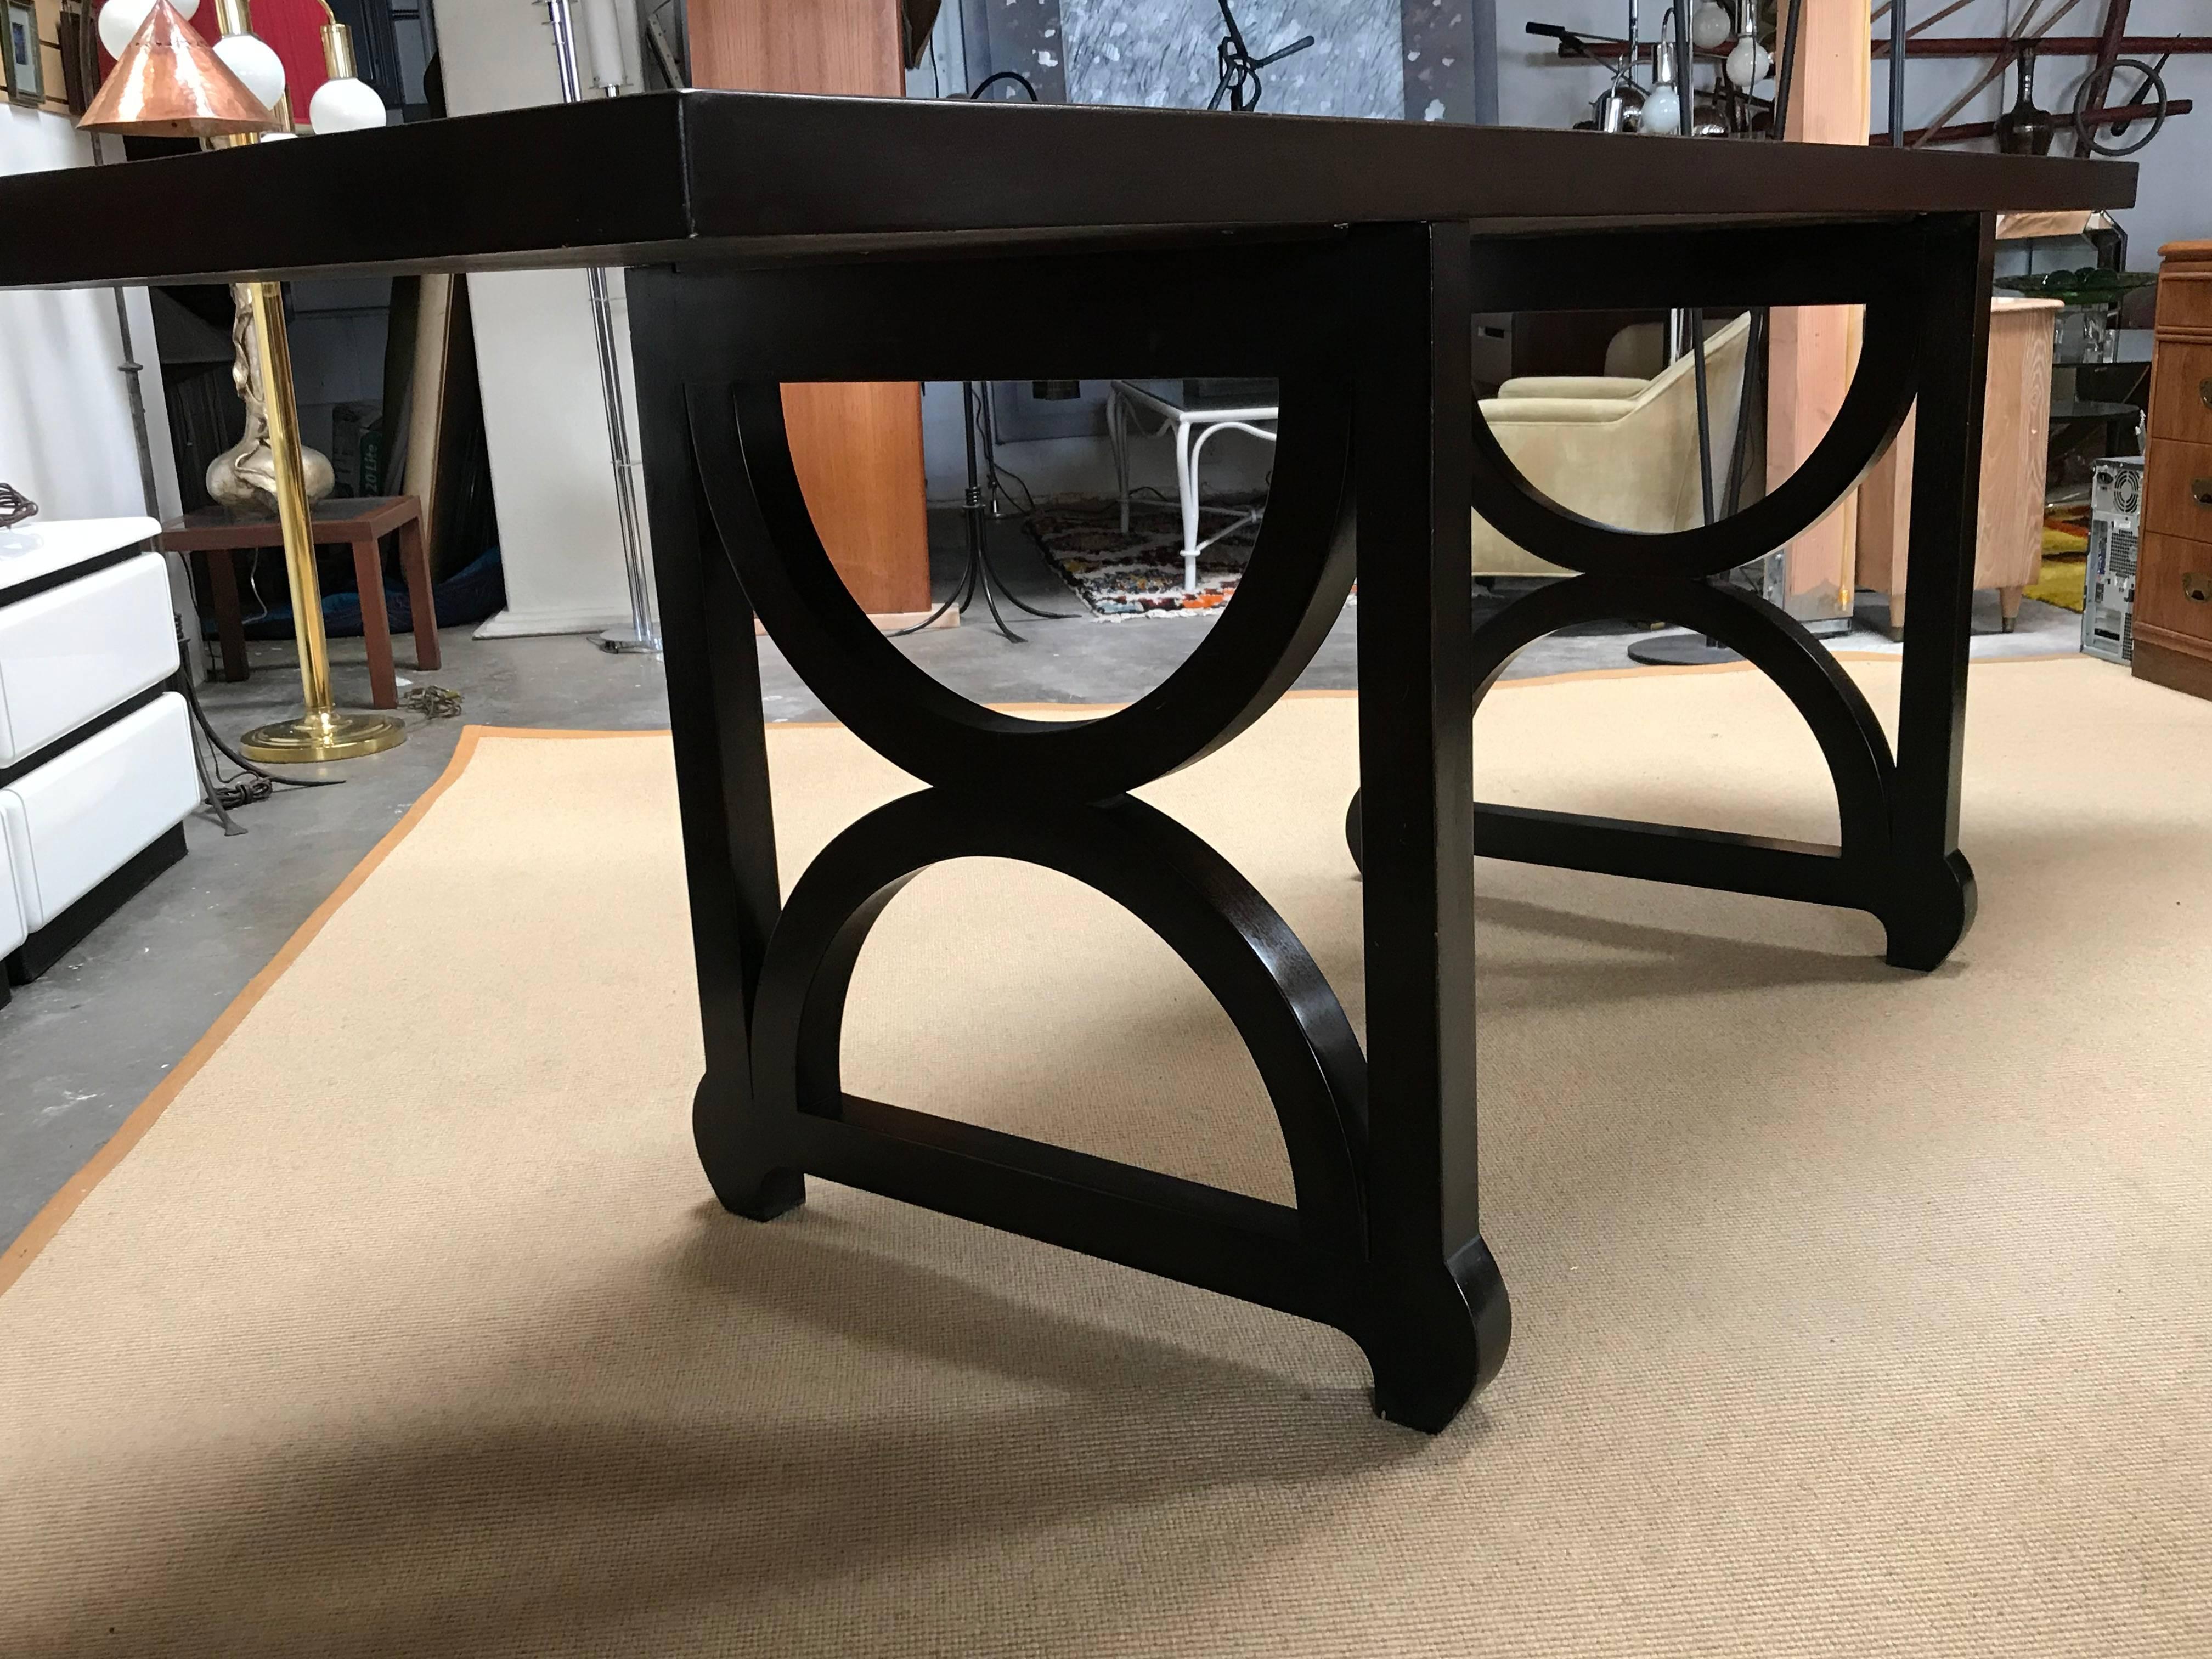 Designed by artist Doug Edge, this solid mahogany console table could be used in an entrance or even a retail space. It is a statement!
 
Measure: The top thickness is 3